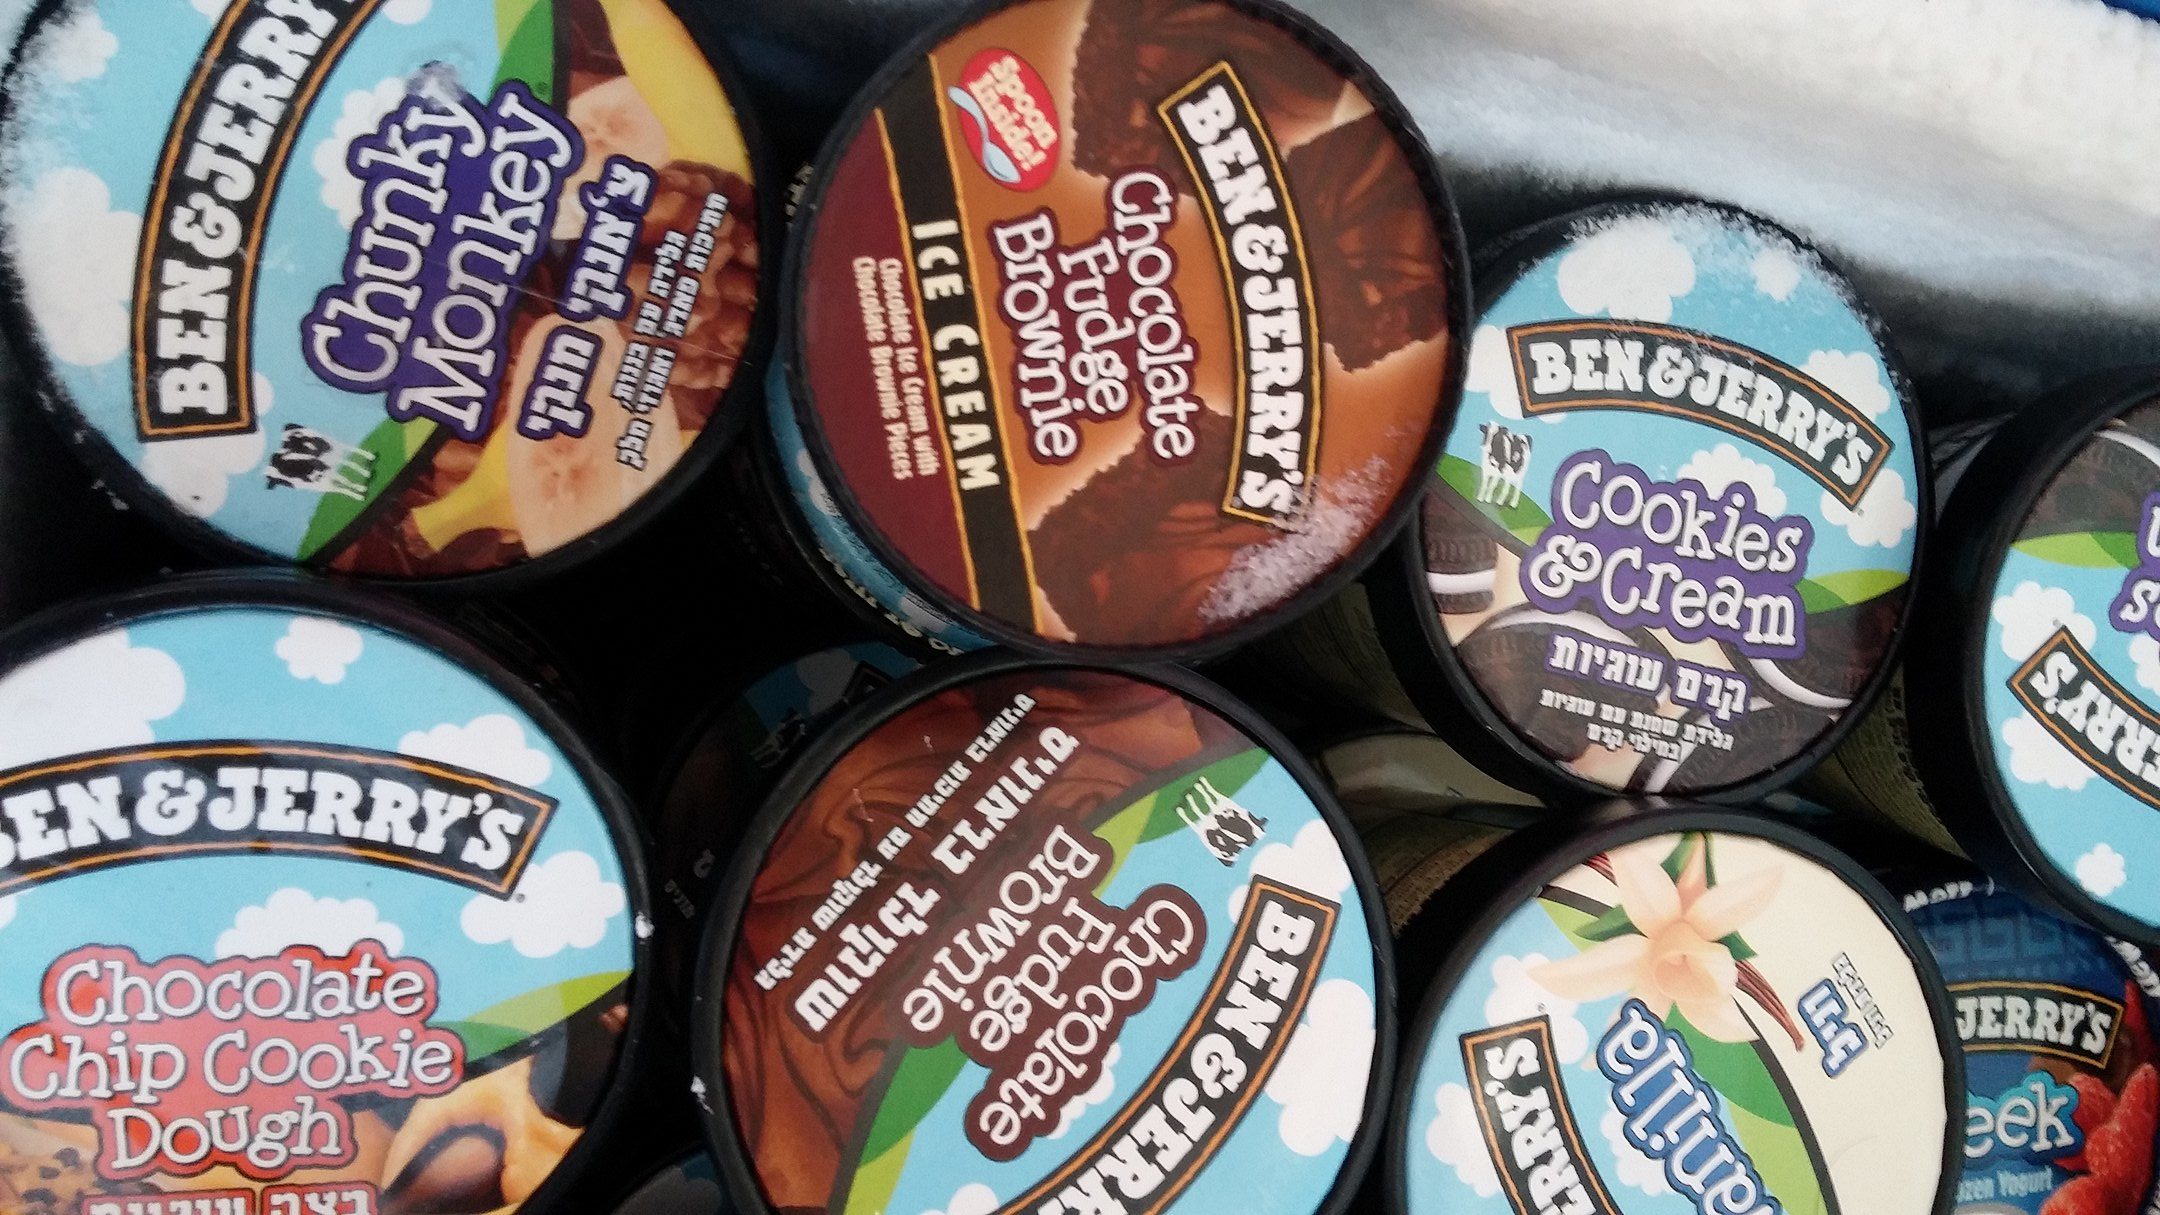 New York Pension Fund Divests $111 Million From Parent Company of Ben & Jerry’s